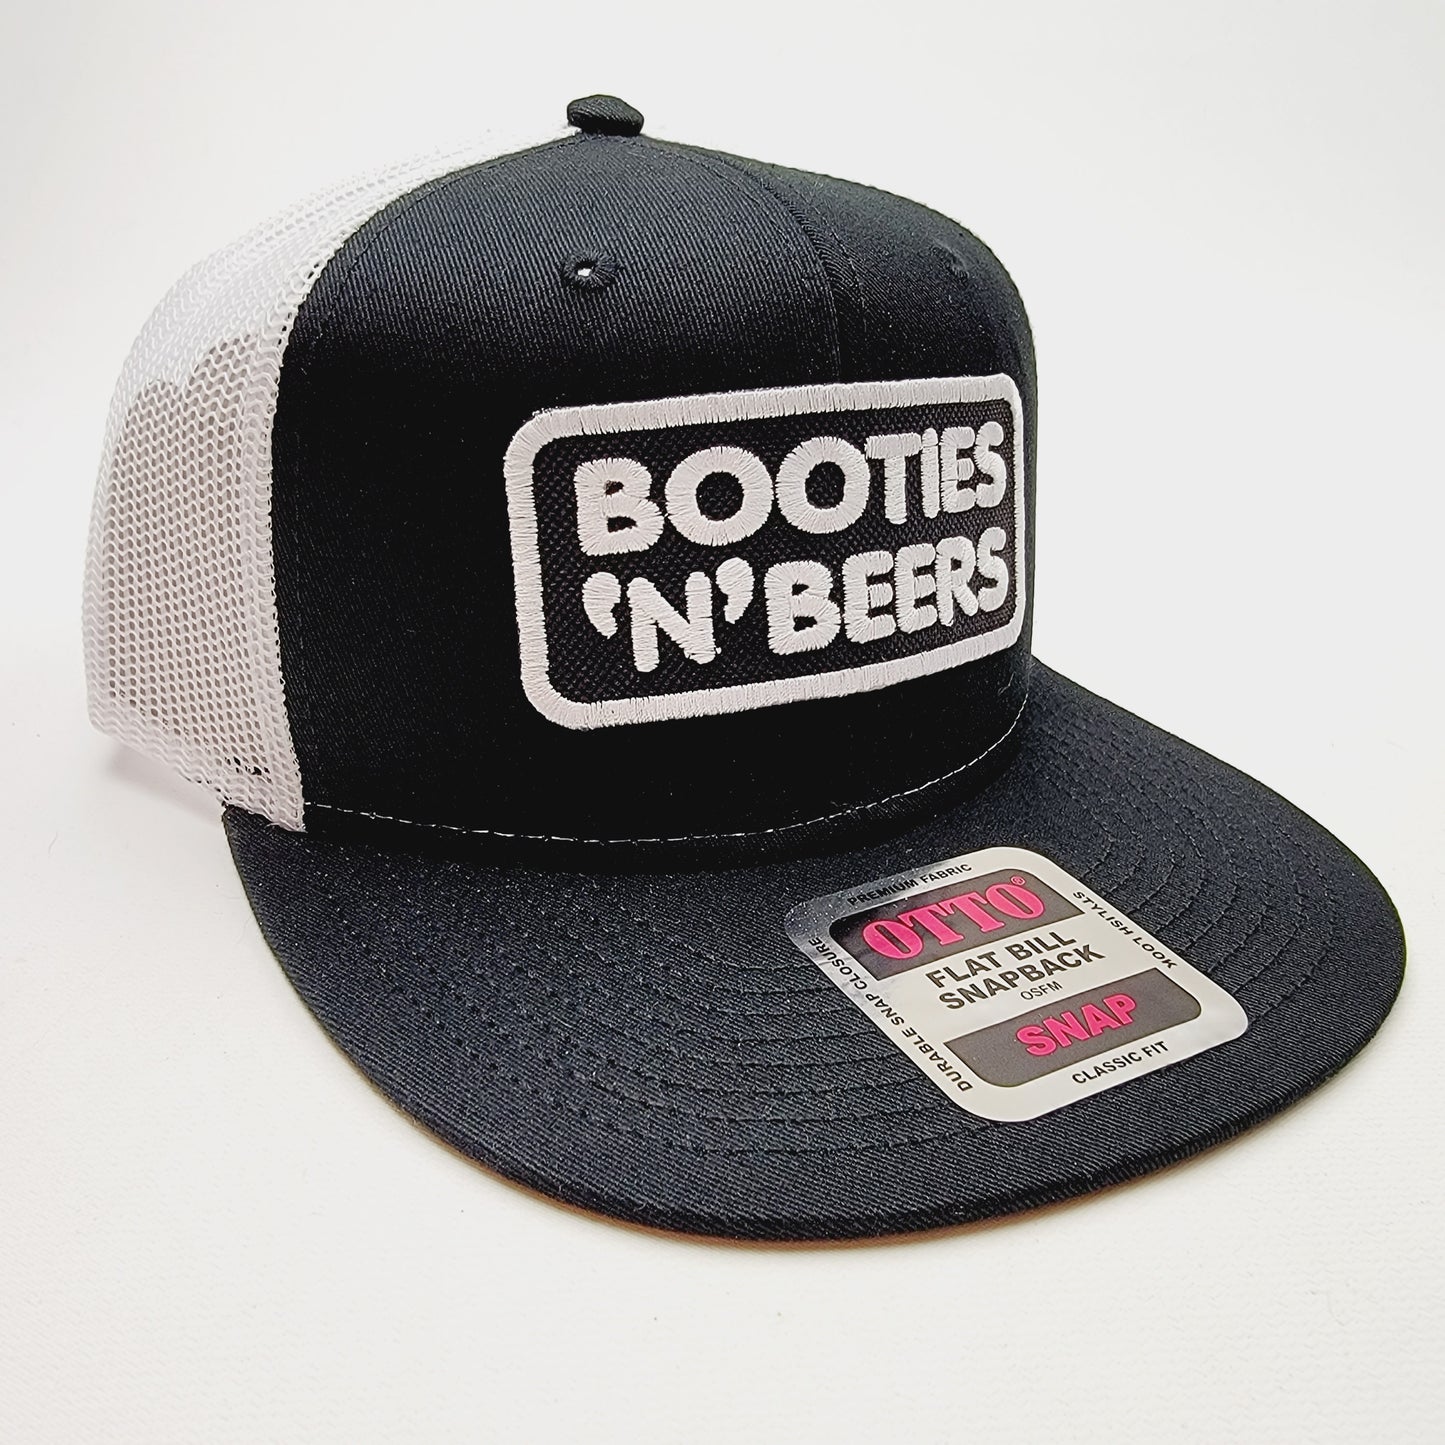 Booties N Beers Embroidered Patch Hat Baseball Cap Adjustable Black/White